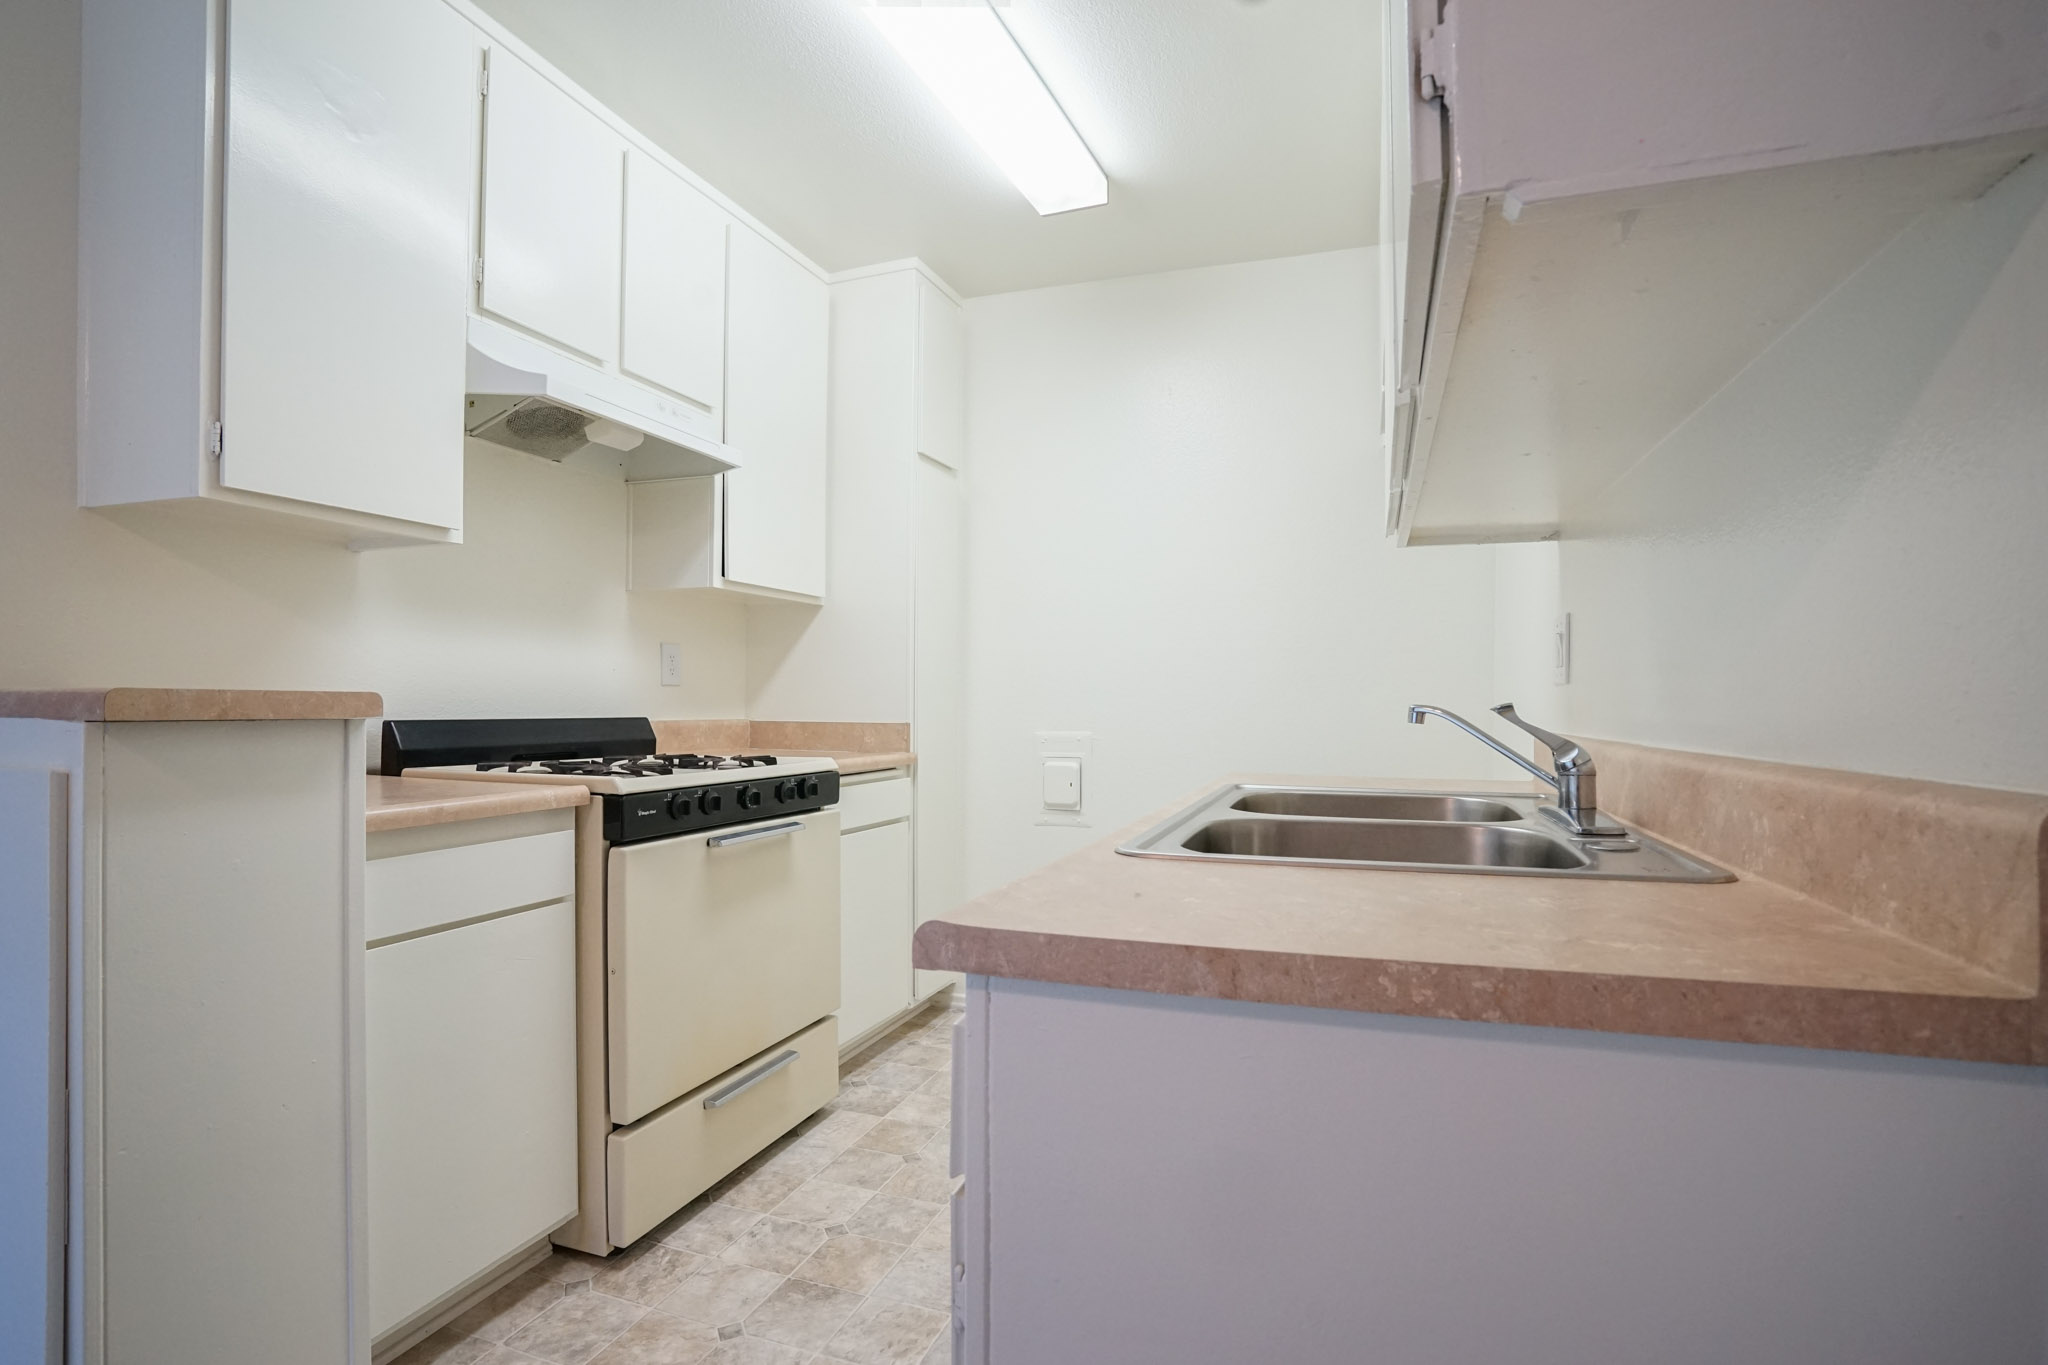 Different angle of the kitchen area. There is a stove and a sink across from it. Both sides have small counter space, and there are upper and lower cabinets.